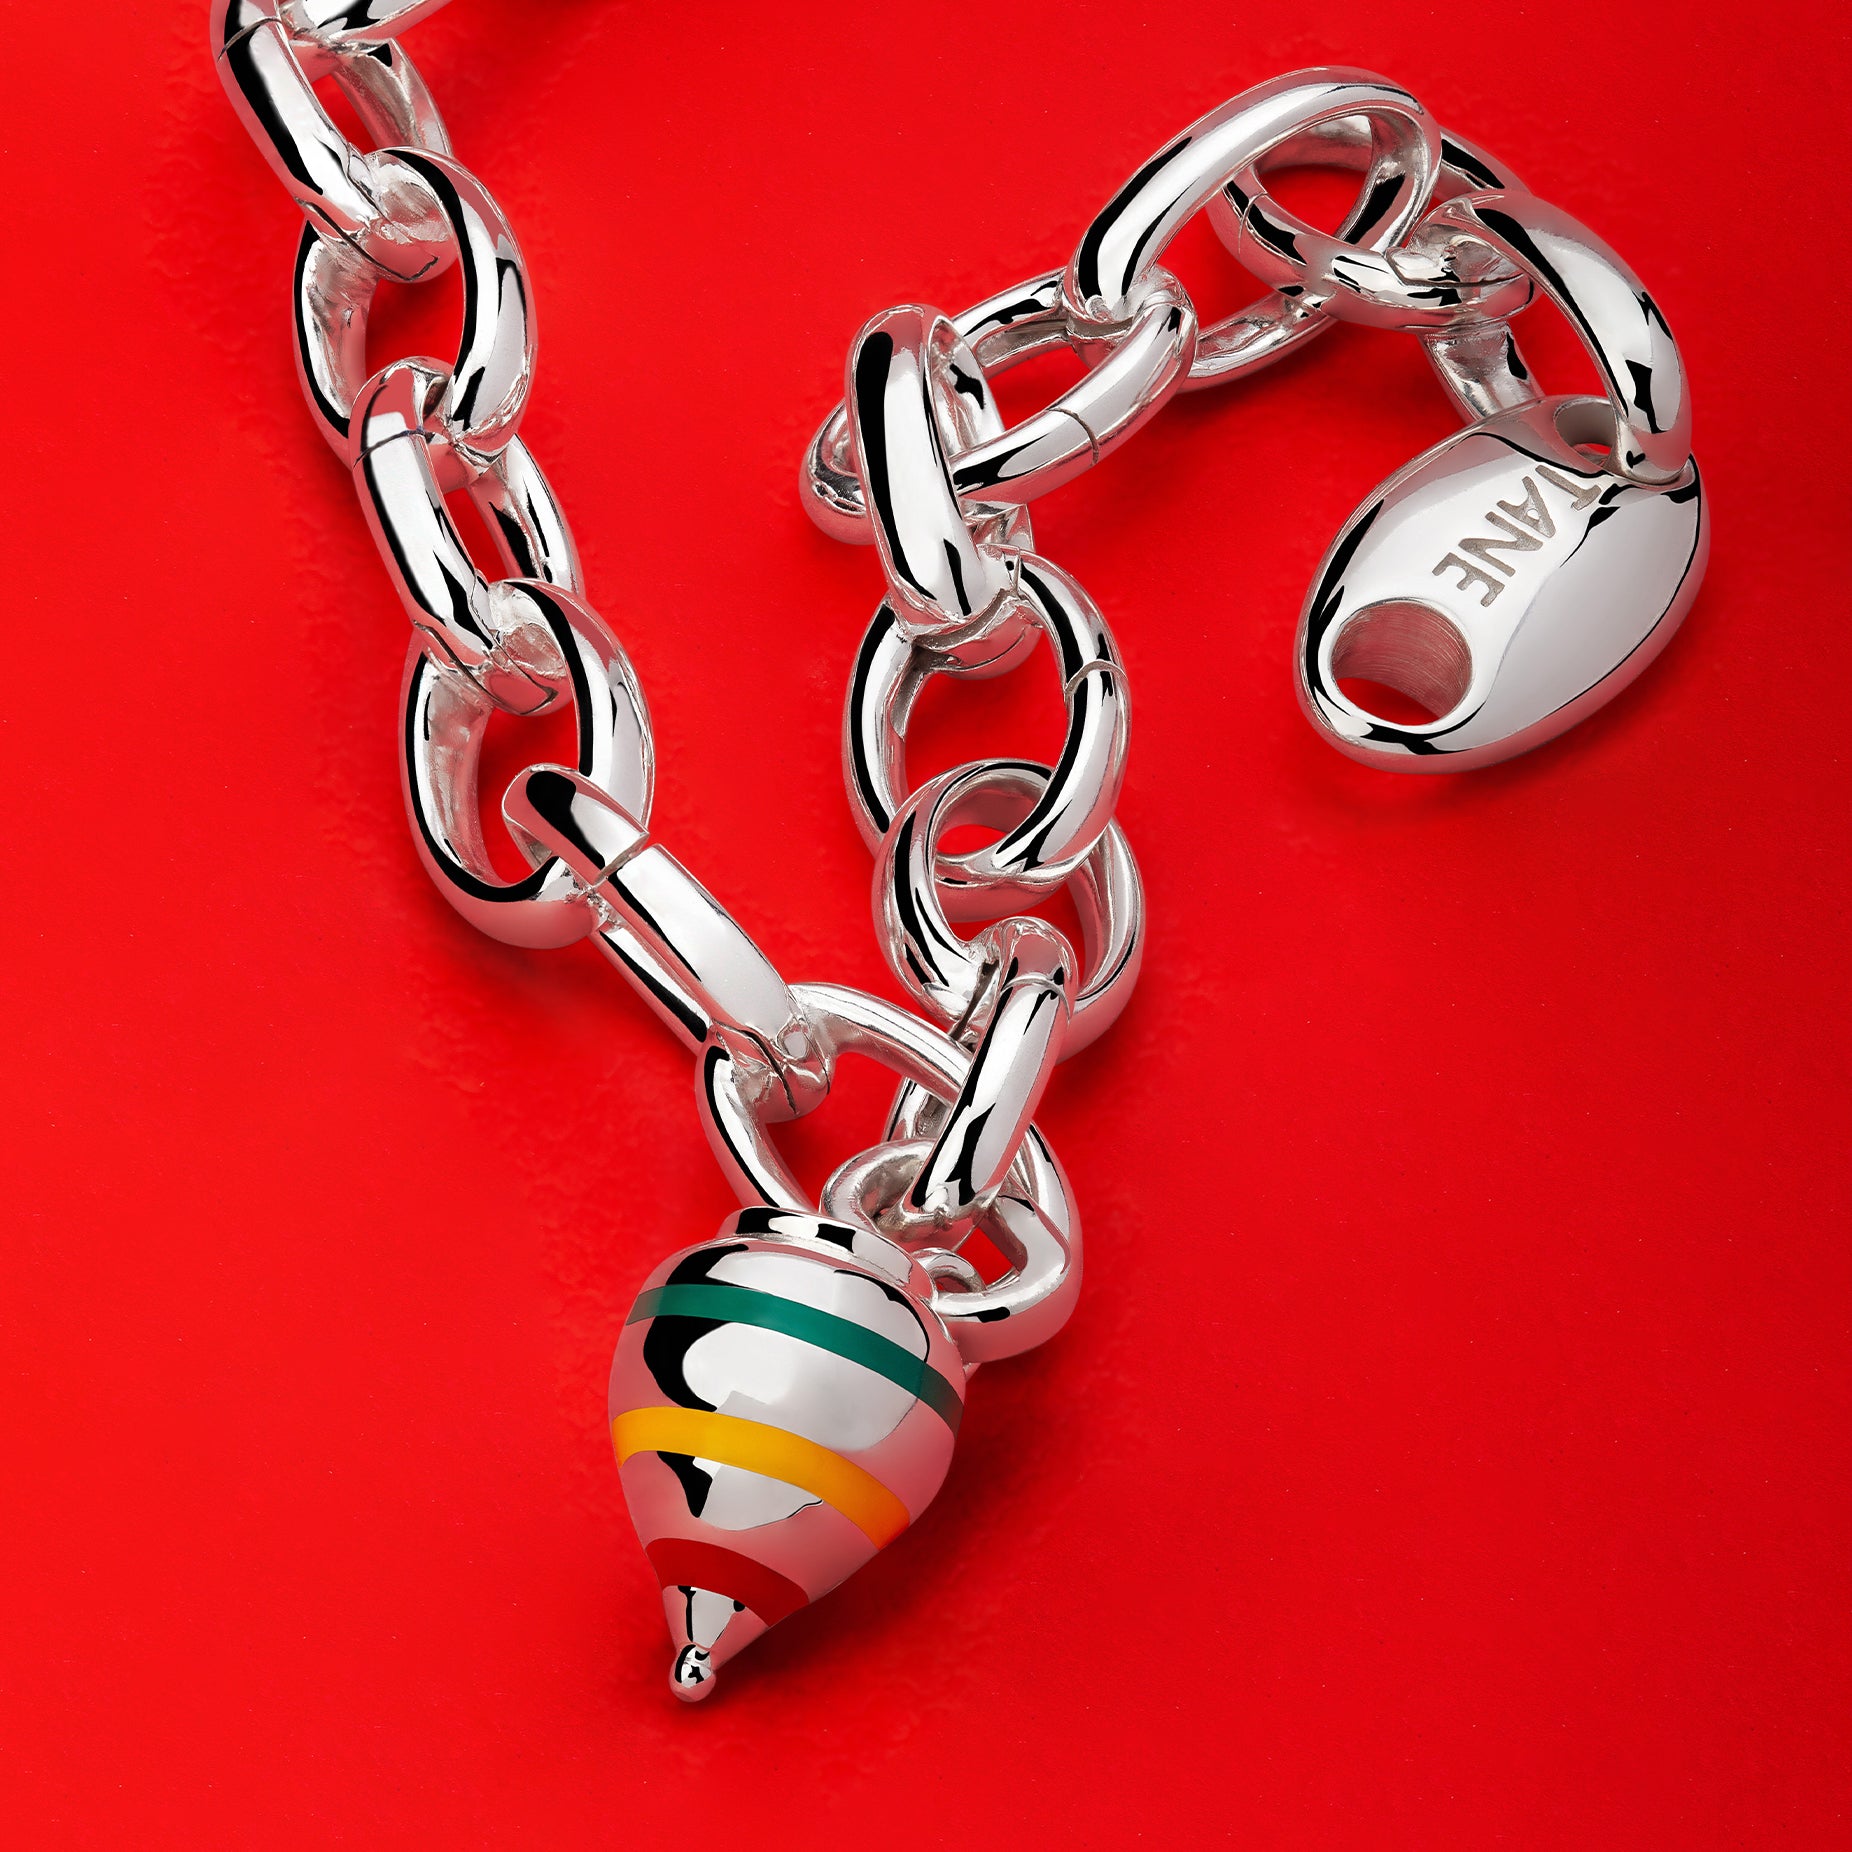 SPINNING TOP CHARM